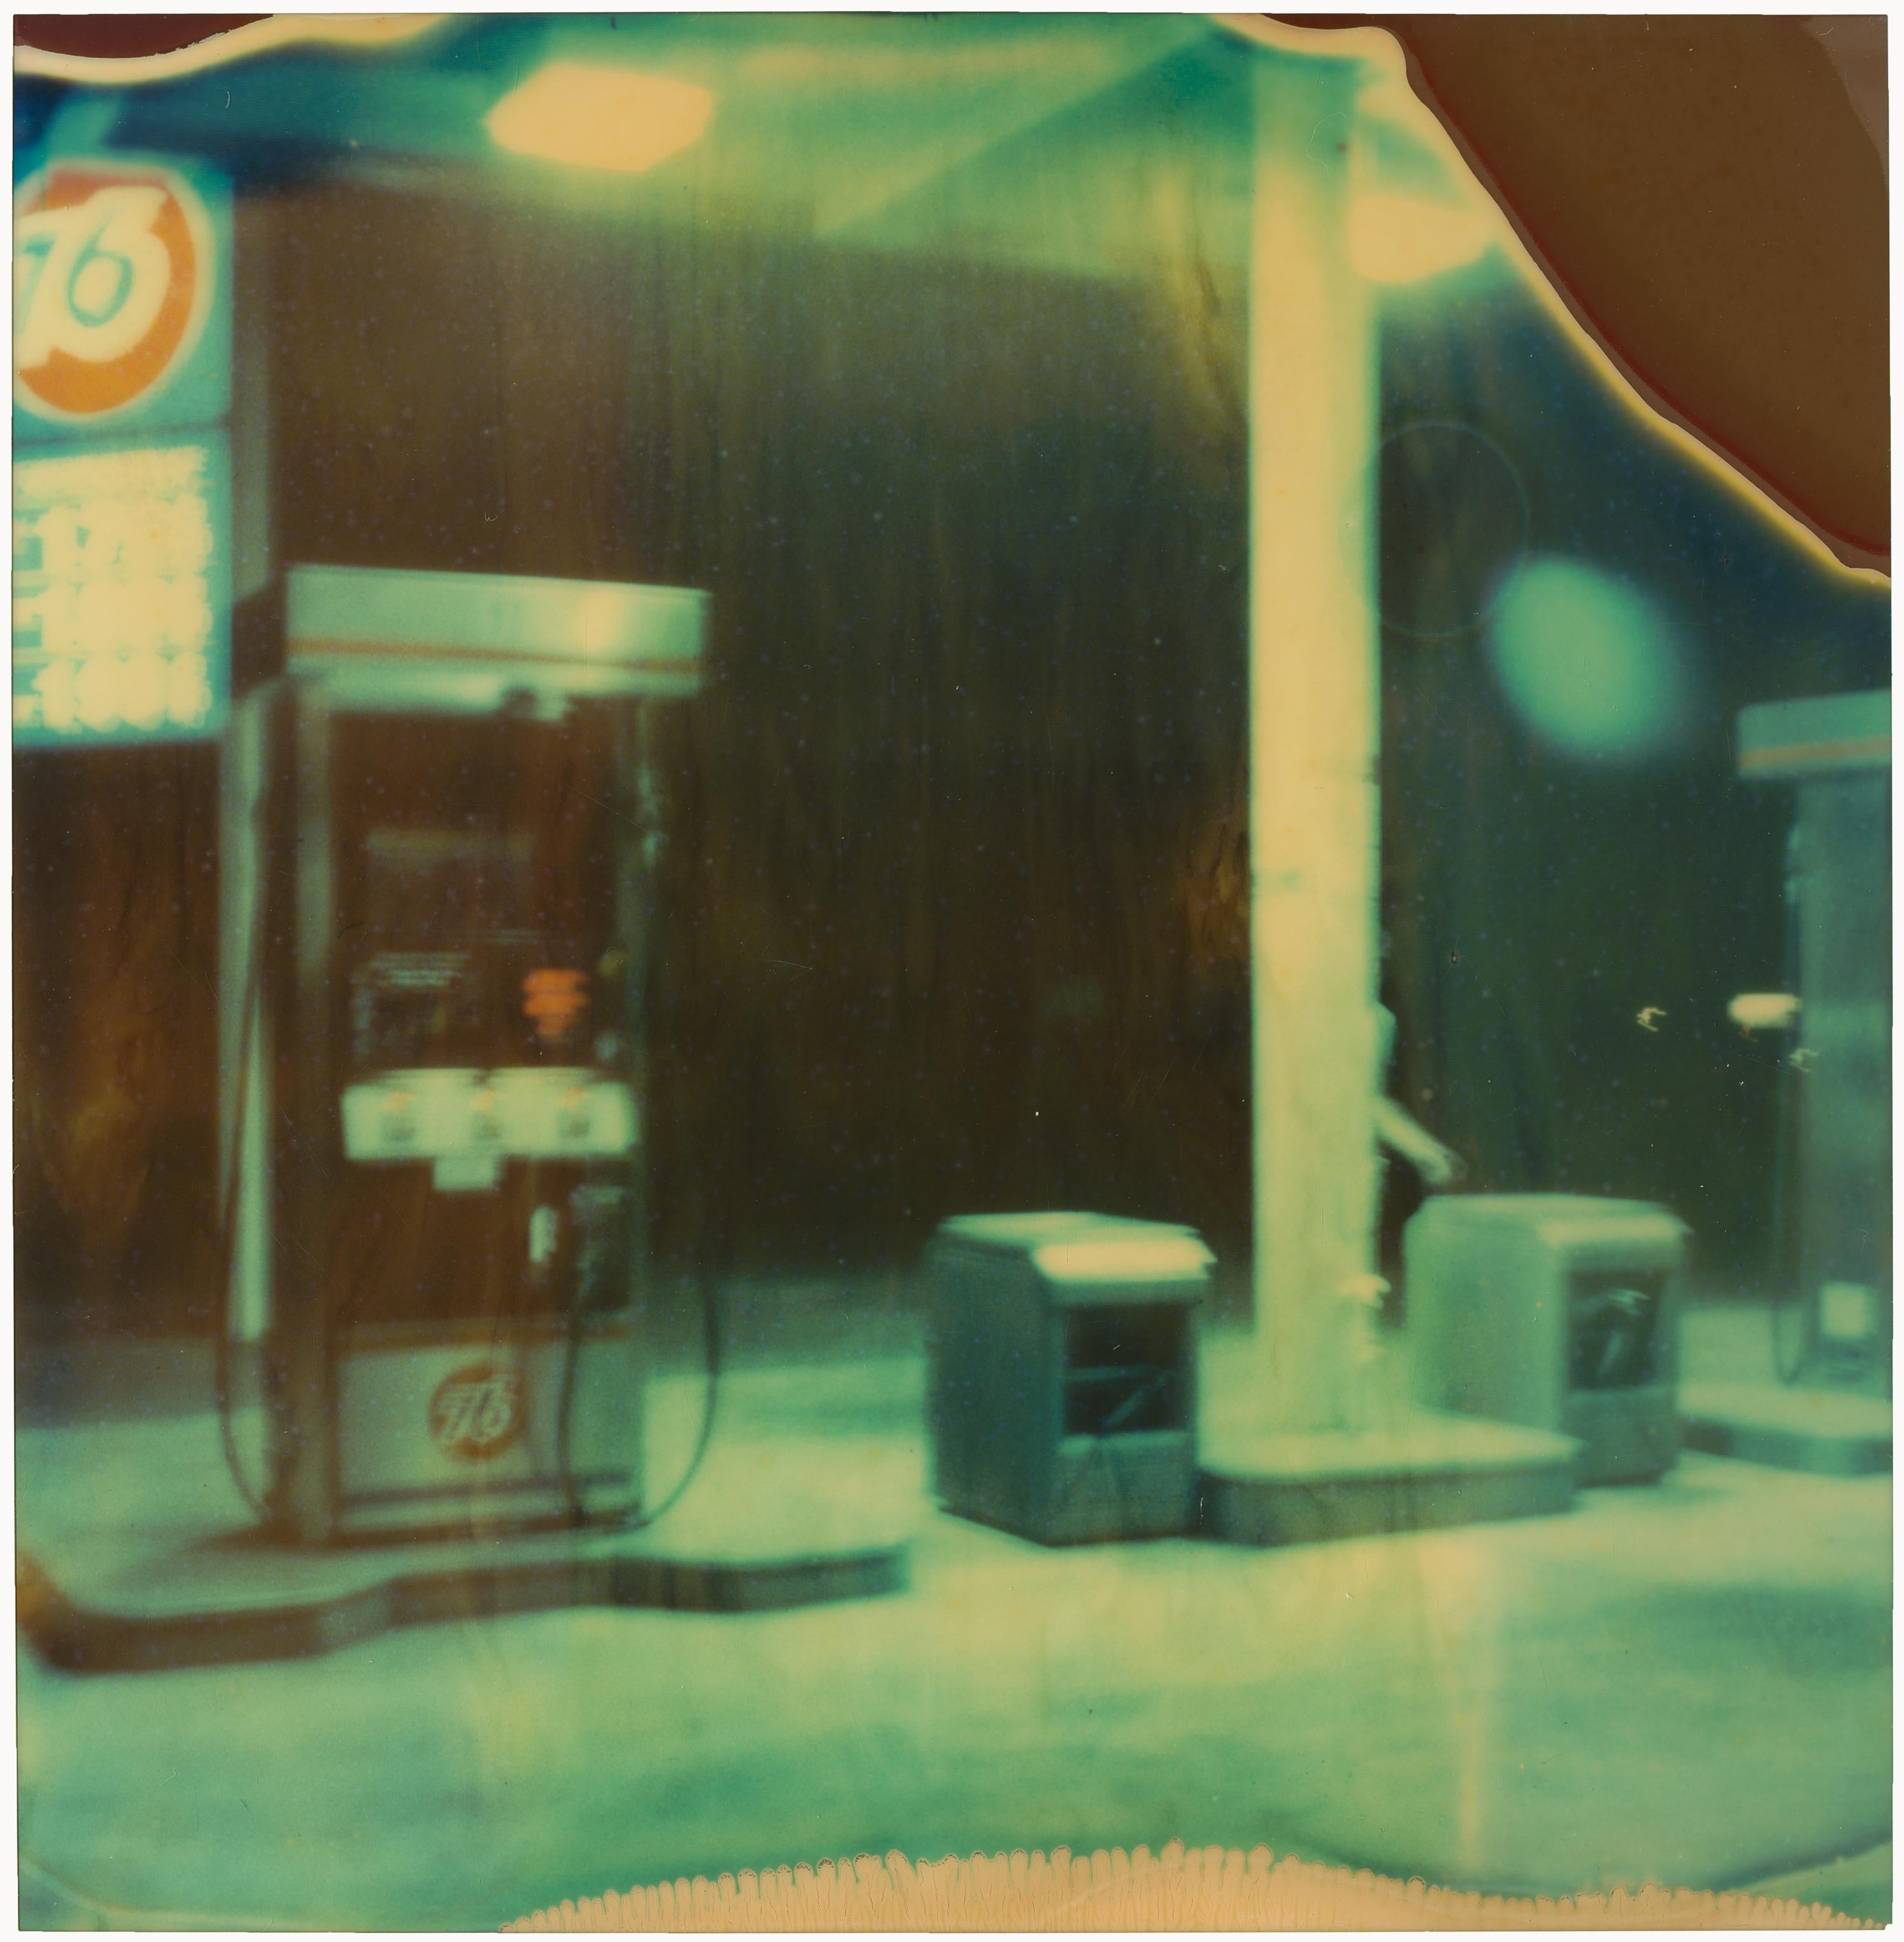 Gas station at Night I (Stranger than Paradise) - 2006

Edition 1/5, 
48x46 each, 93x91cm installed with gaps. 
4 analog C-Prints, hand-printed by the artist, based on the 4 Polaroids.  
Mounted on Aluminum with matte UV-Protection. 
Artist